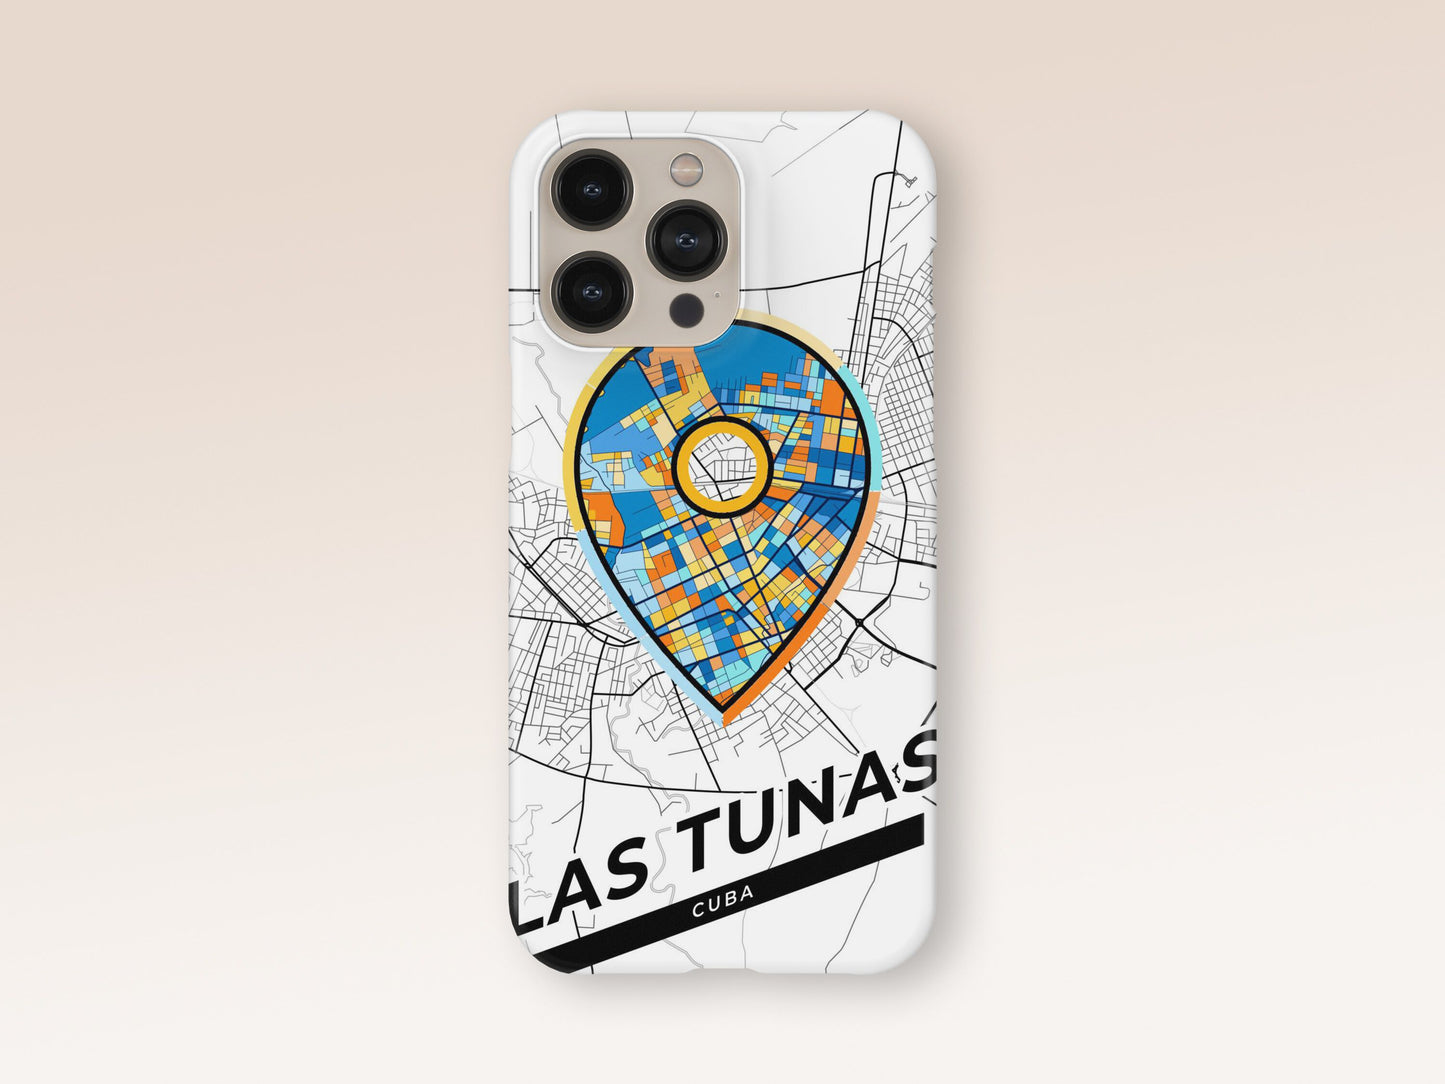 Las Tunas Cuba slim phone case with colorful icon. Birthday, wedding or housewarming gift. Couple match cases. 1